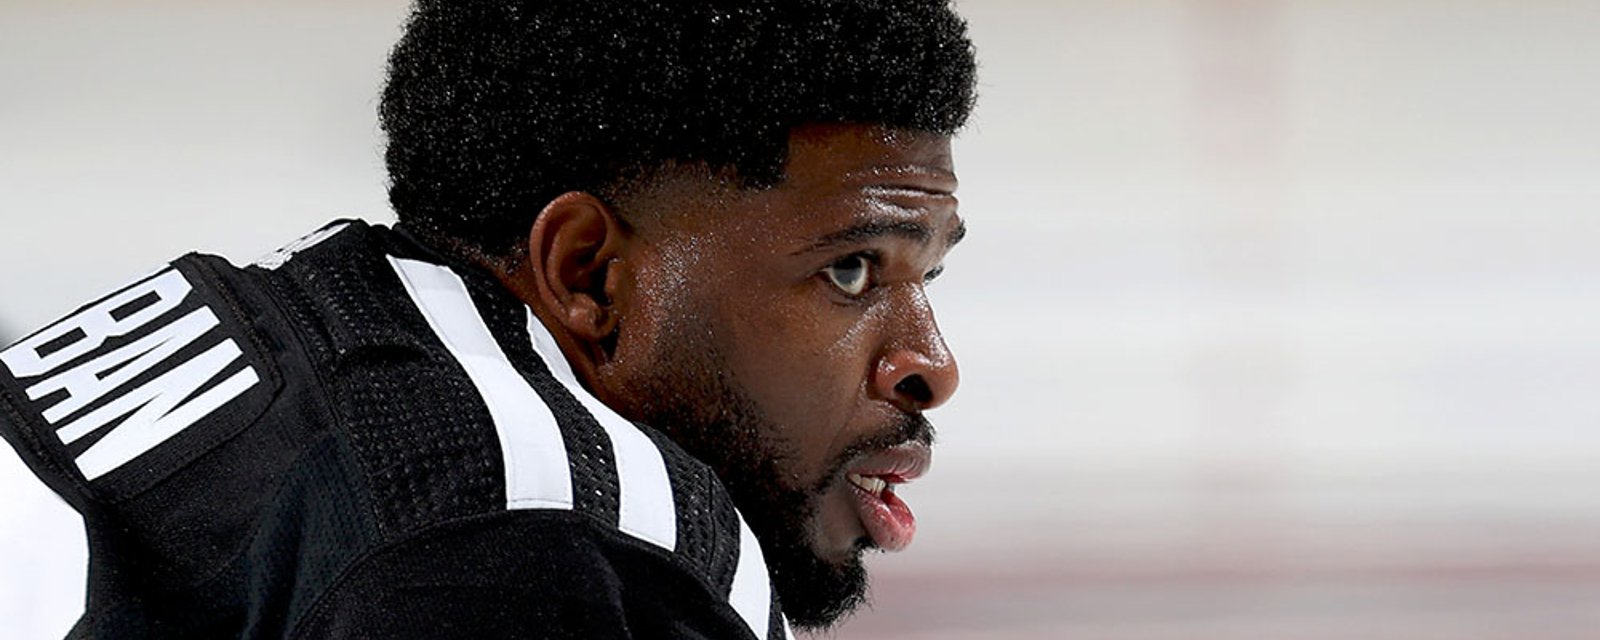 P.K. Subban's future plans may have been leaked